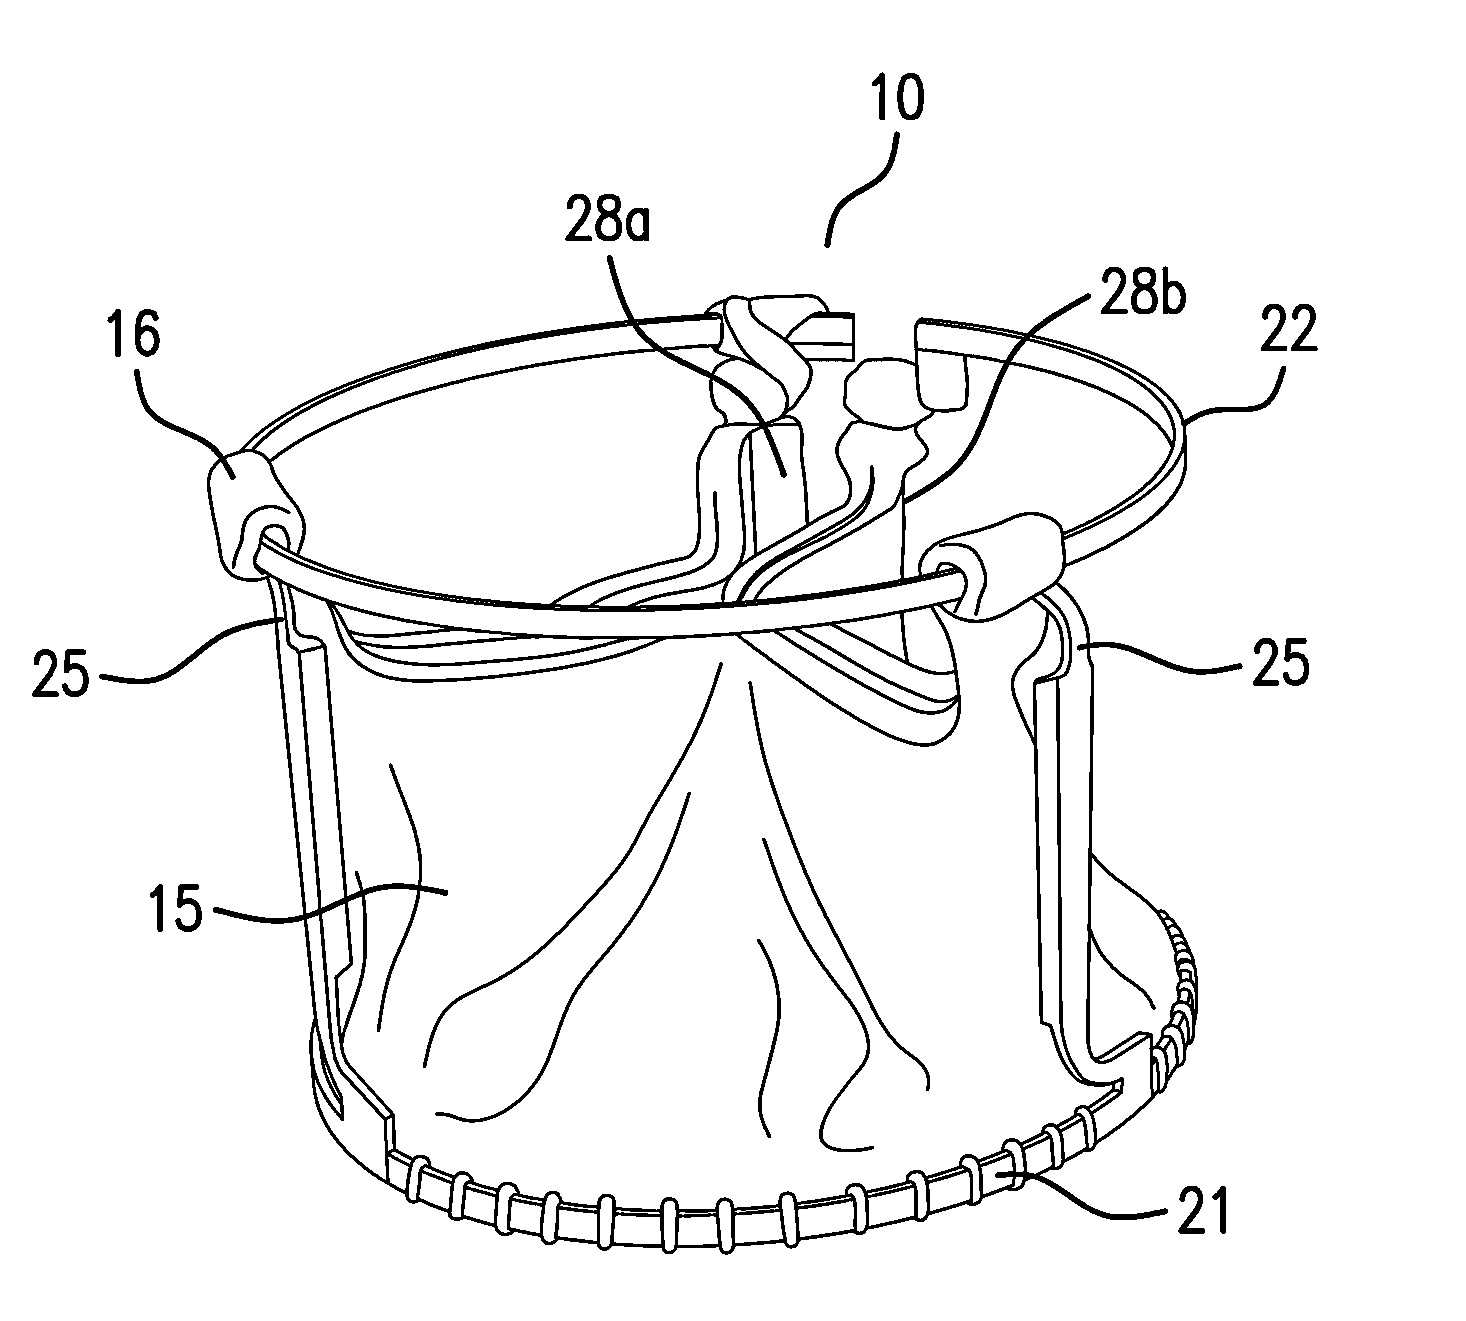 System and method for assembling a folded percutaneous valve